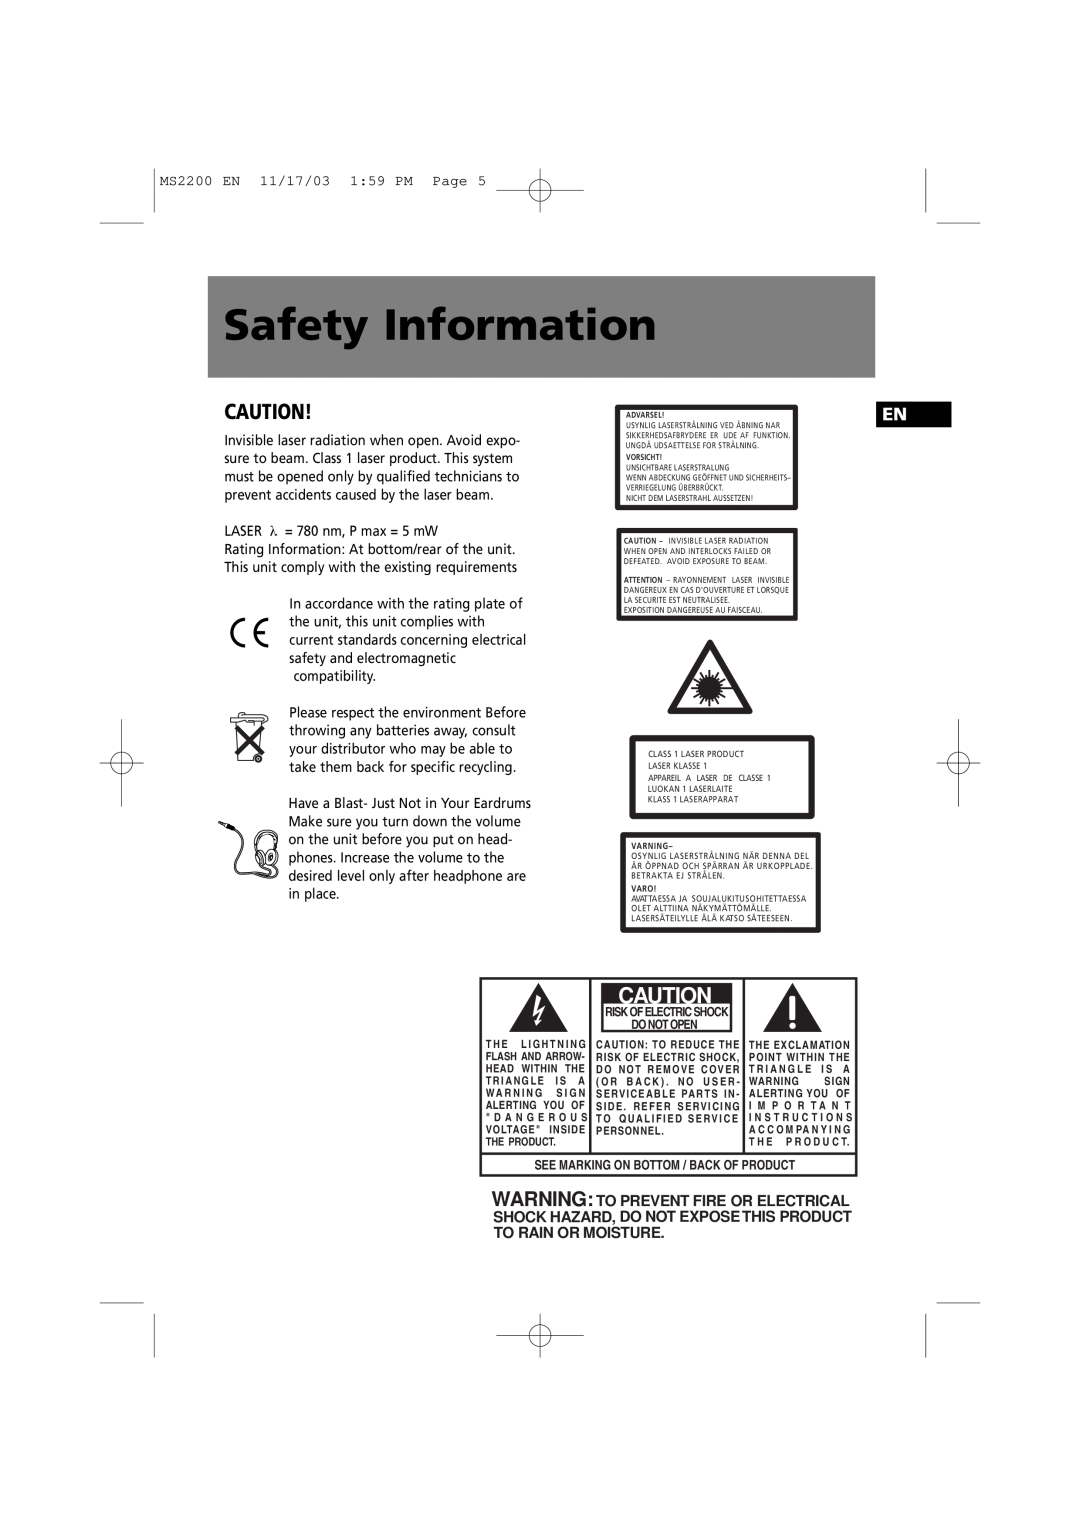 Technicolor - Thomson MS2200 manual Safety Information 